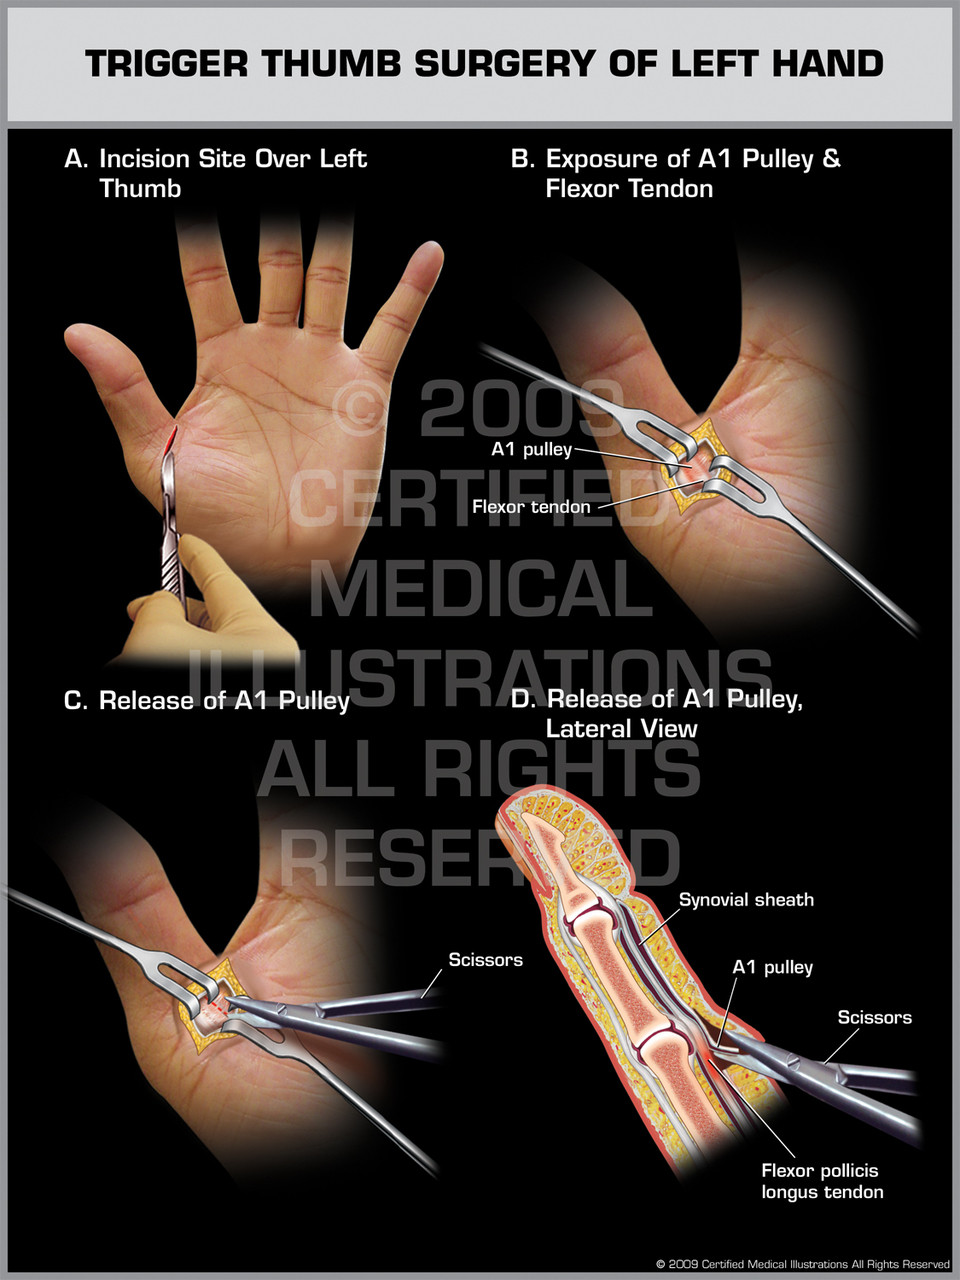 Trigger Thumb Surgery of Left Hand